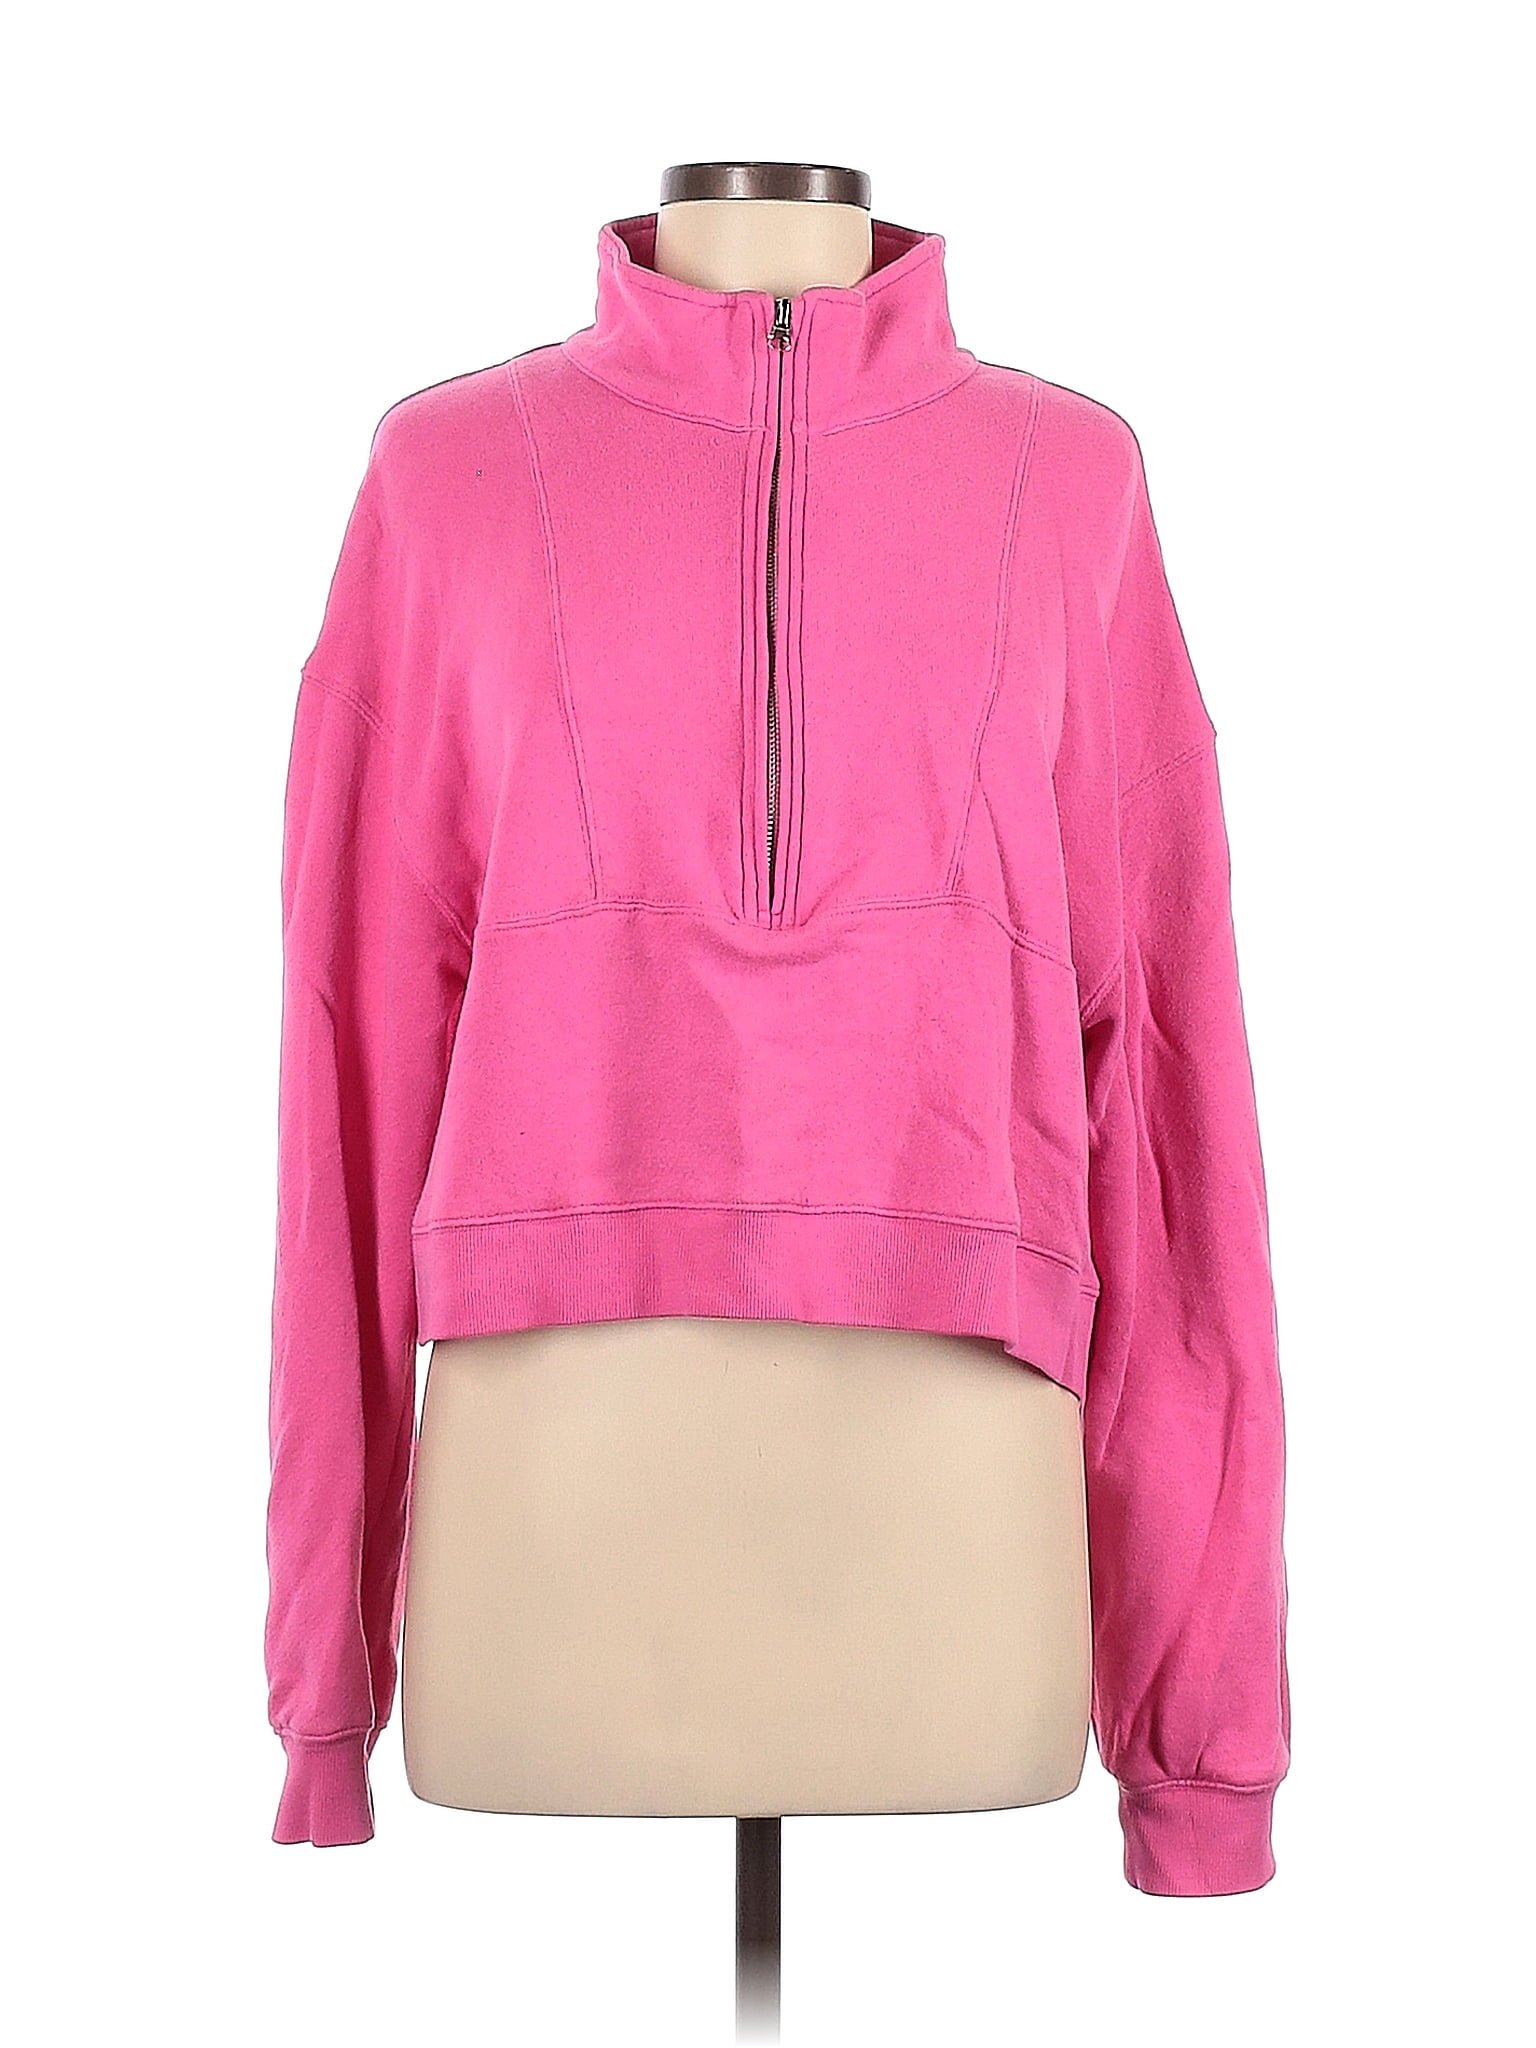 Sincerely Jules for Bandier 100% Cotton Pink Track Jacket Size M - 81% off